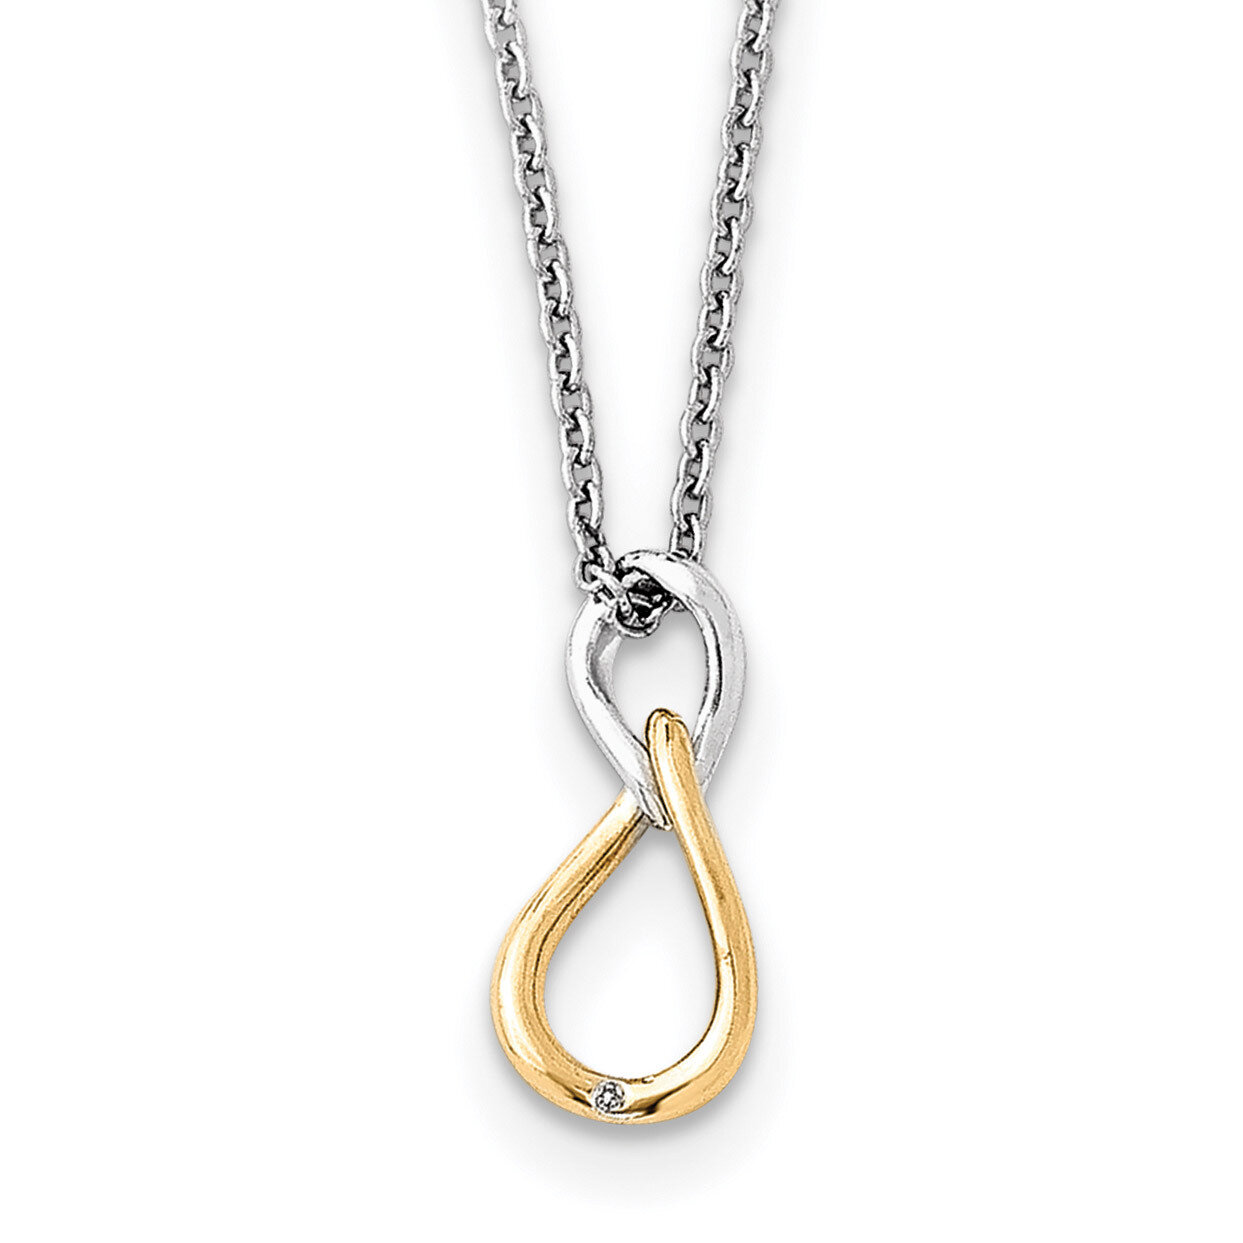 Gold-Plated Diamond Necklace Sterling Silver QW352-18